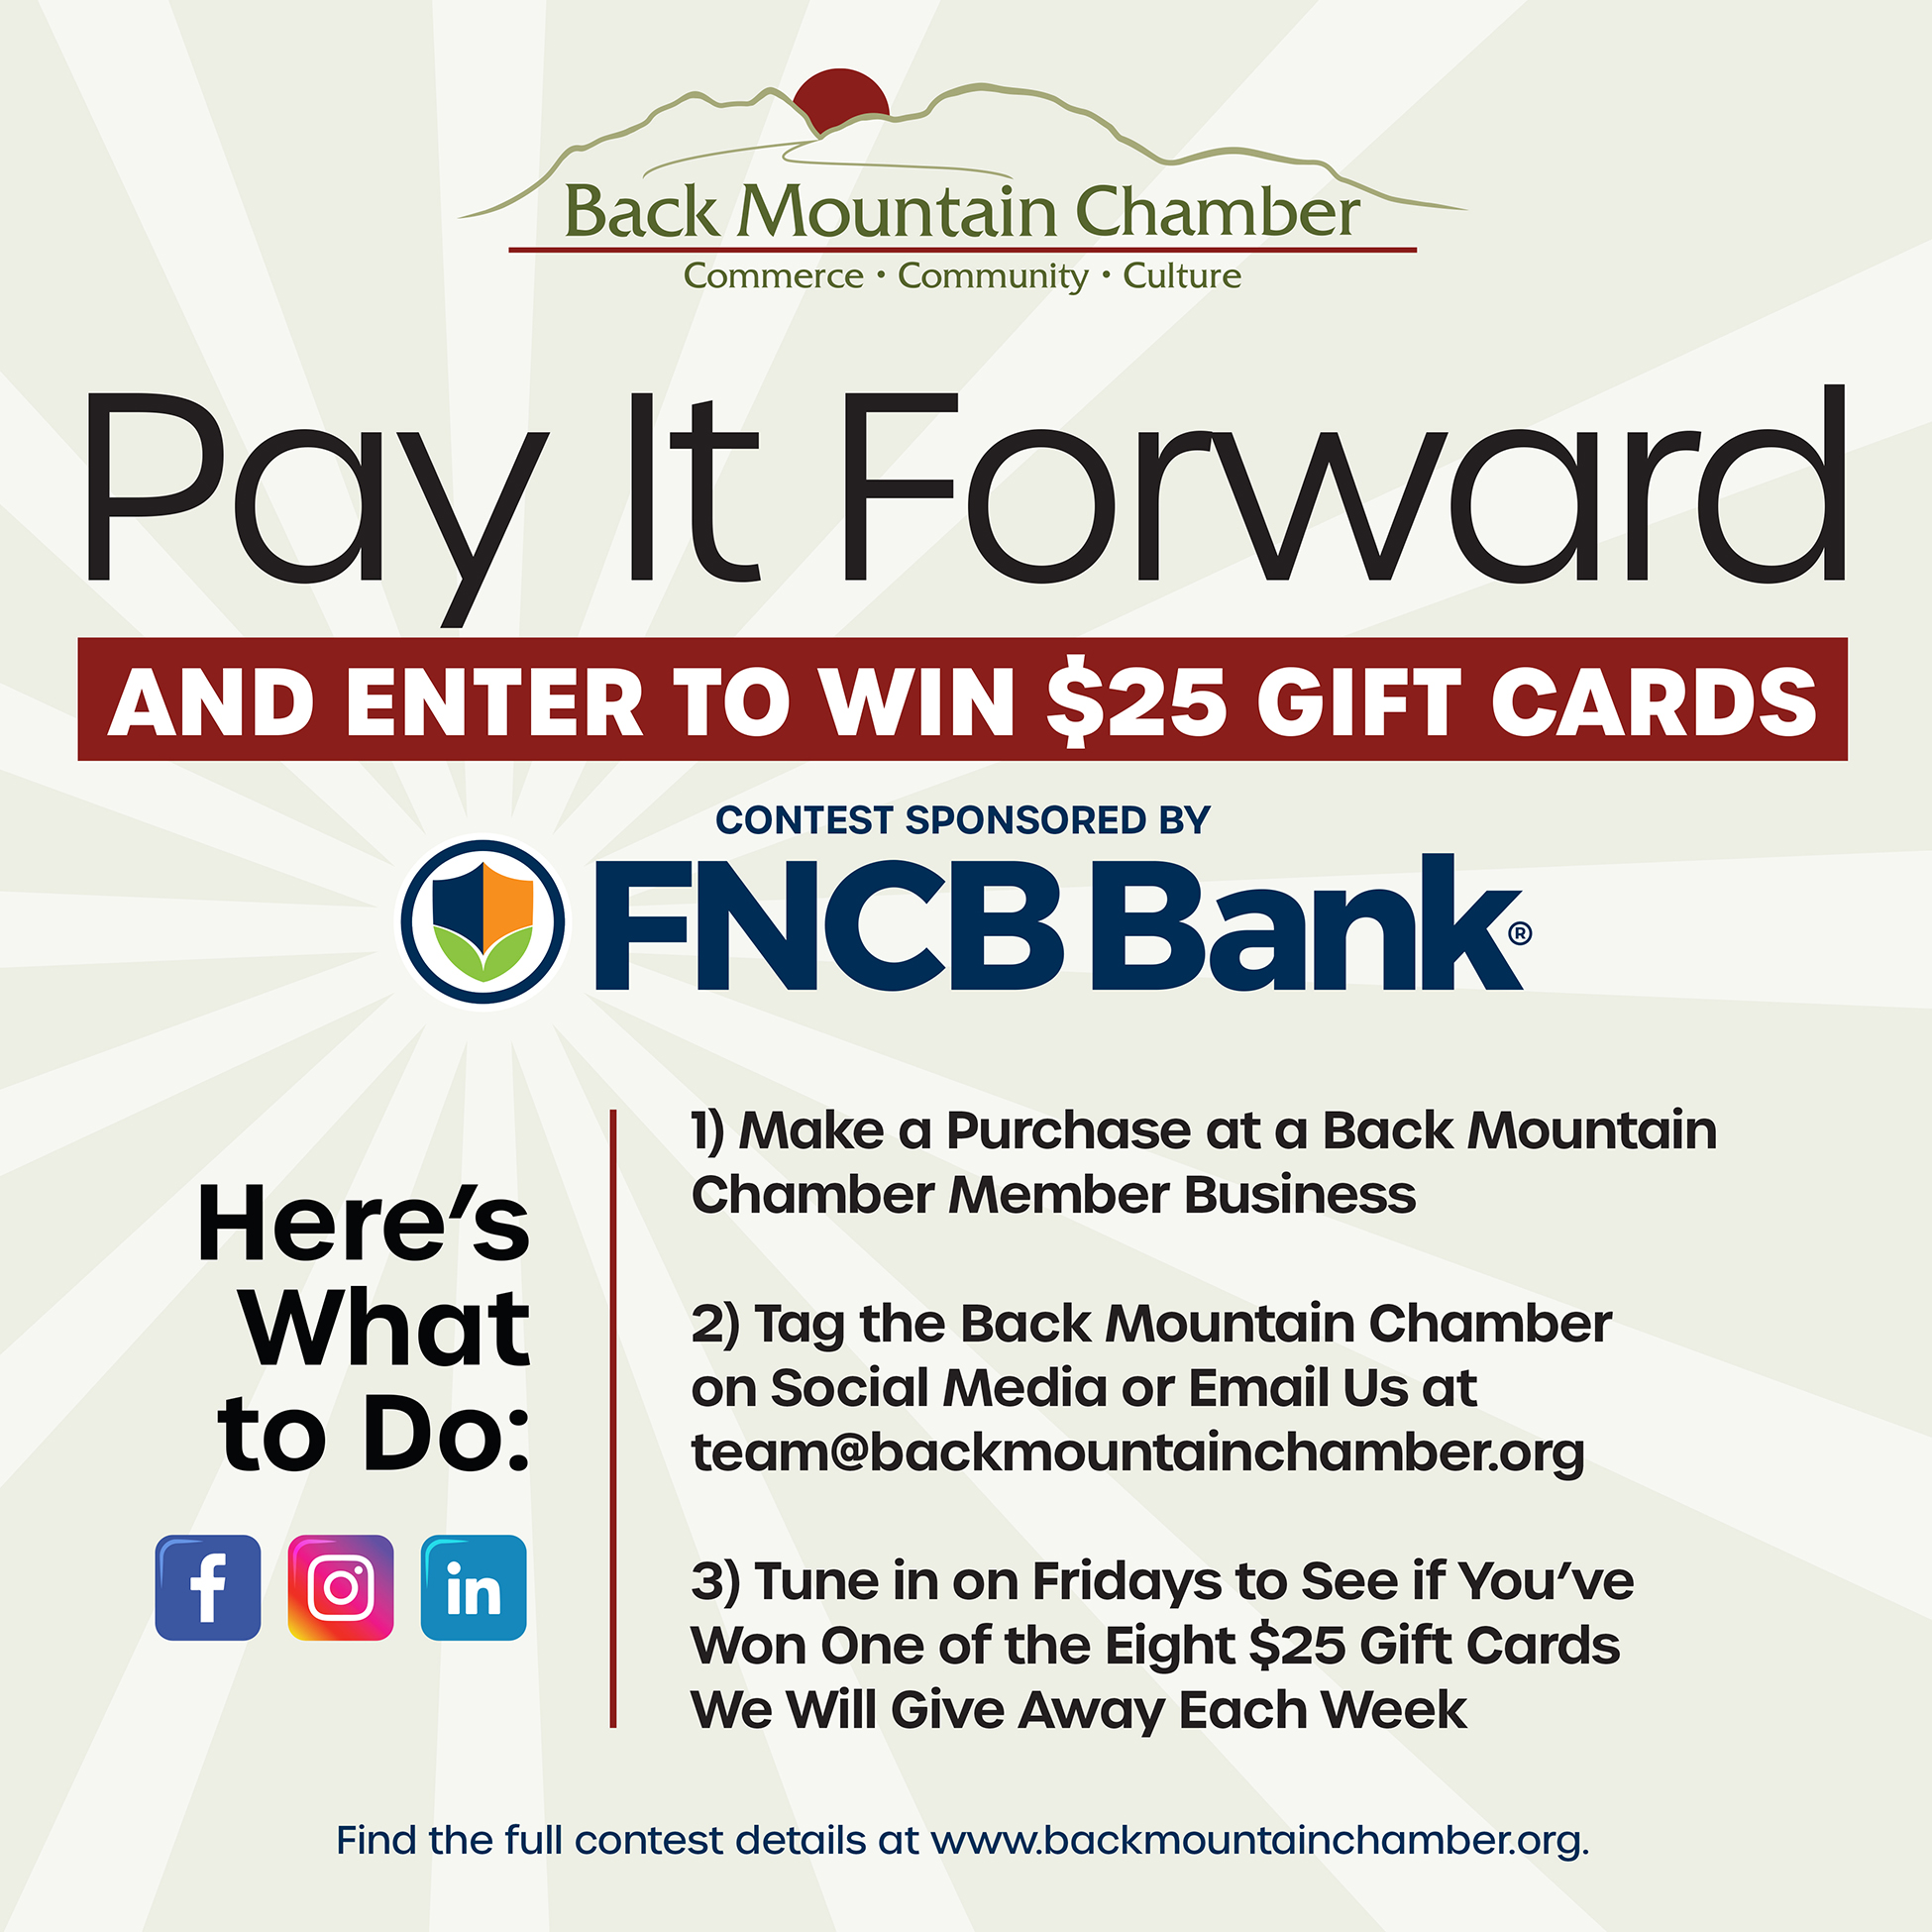 ​Back Mountain Chamber's Pay It Forward Contest Sponsored by FNCB Bank